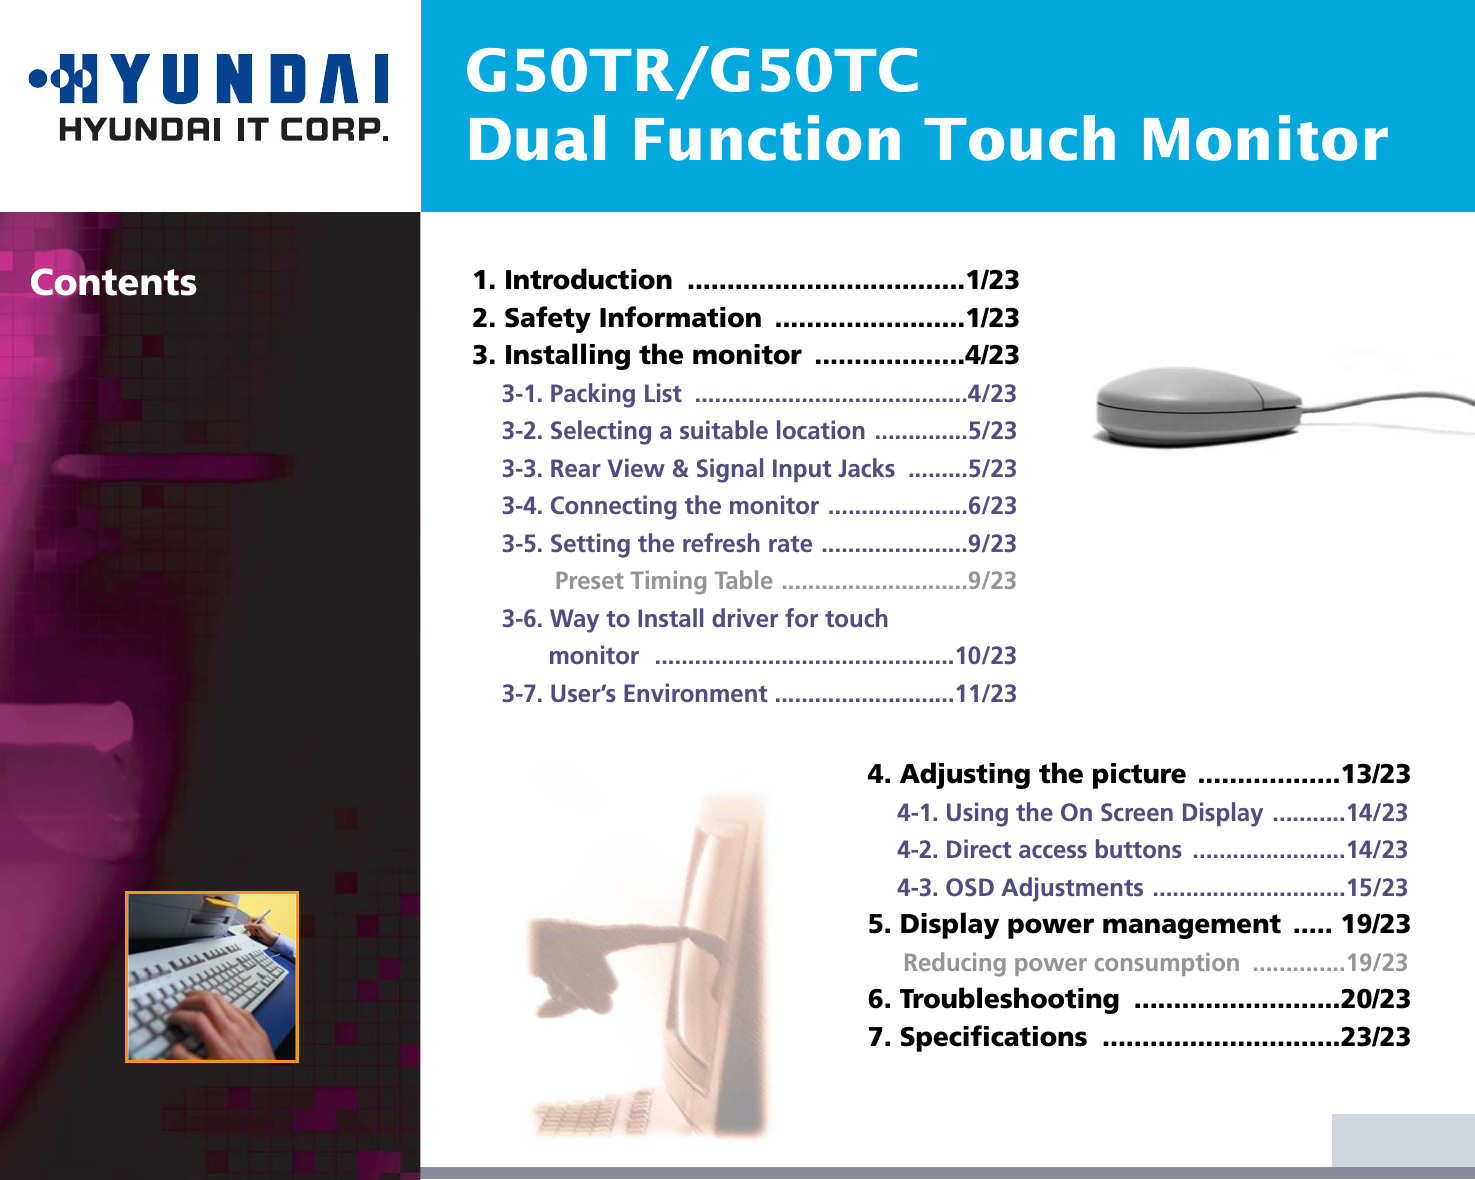 G50TR/G50TCDual Function Touch MonitorContents 1. Introduction  ...................................1/232. Safety Information  ........................1/233. Installing the monitor  ...................4/233-1. Packing List  .........................................4/233-2. Selecting a suitable location ..............5/233-3. Rear View &amp; Signal Input Jacks  .........5/233-4. Connecting the monitor .....................6/233-5. Setting the refresh rate ......................9/23Preset Timing Table ............................9/233-6. Way to Install driver for touch monitor .............................................10/233-7. User’s Environment ...........................11/234. Adjusting the picture ..................13/234-1. Using the On Screen Display ...........14/234-2. Direct access buttons  .......................14/234-3. OSD Adjustments .............................15/235. Display power management  ..... 19/23Reducing power consumption  ..............19/236. Troubleshooting  ..........................20/237. Specifications  ..............................23/23